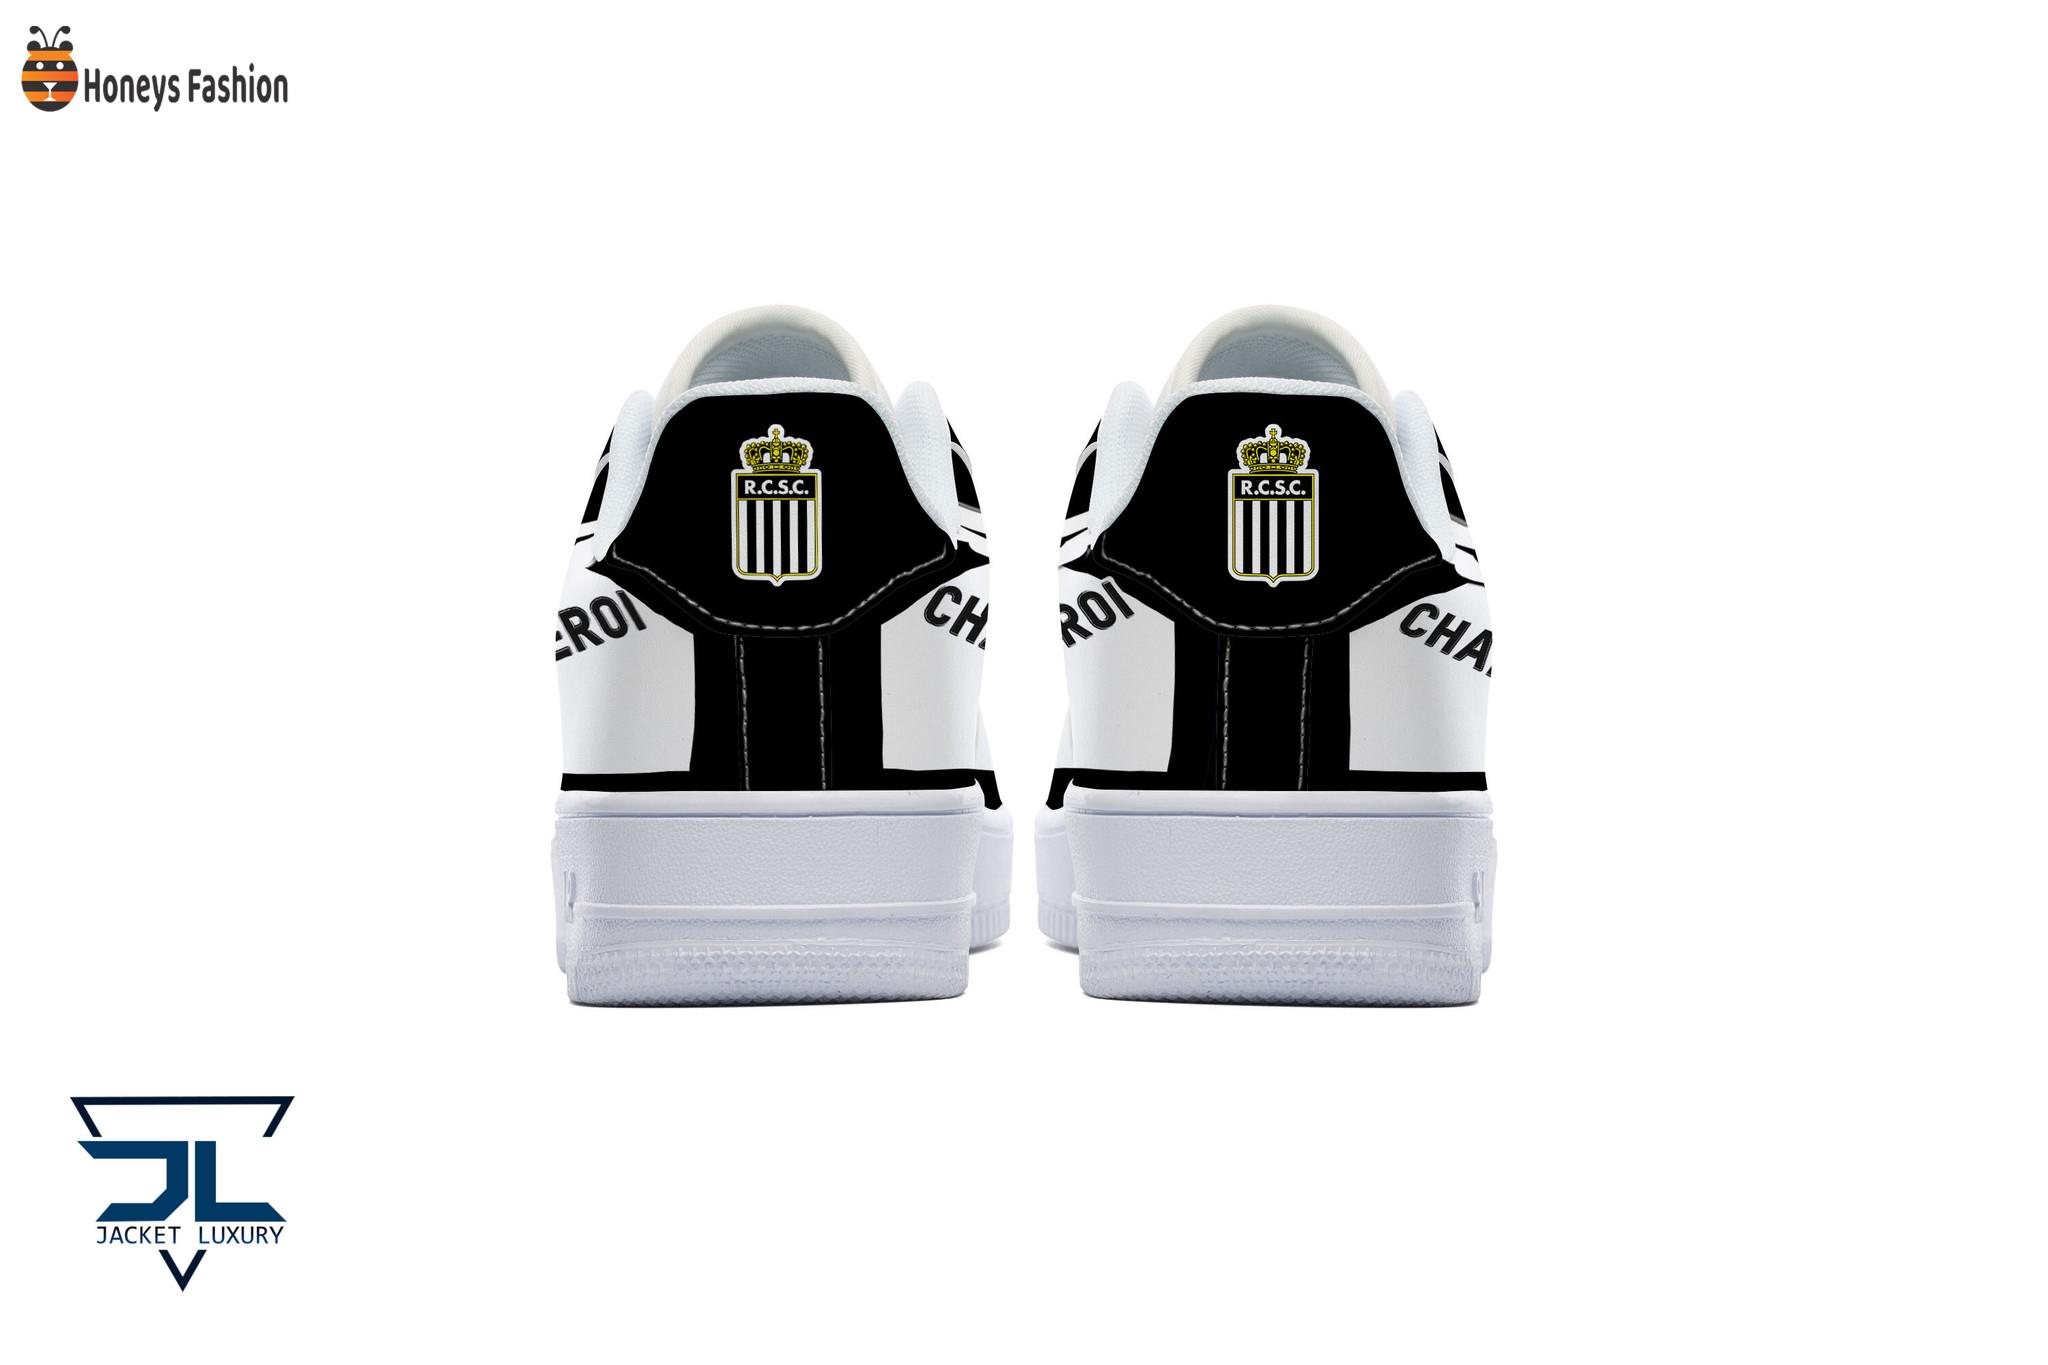 R. Charleroi S.C Air Force 1 Shoes Sneaker